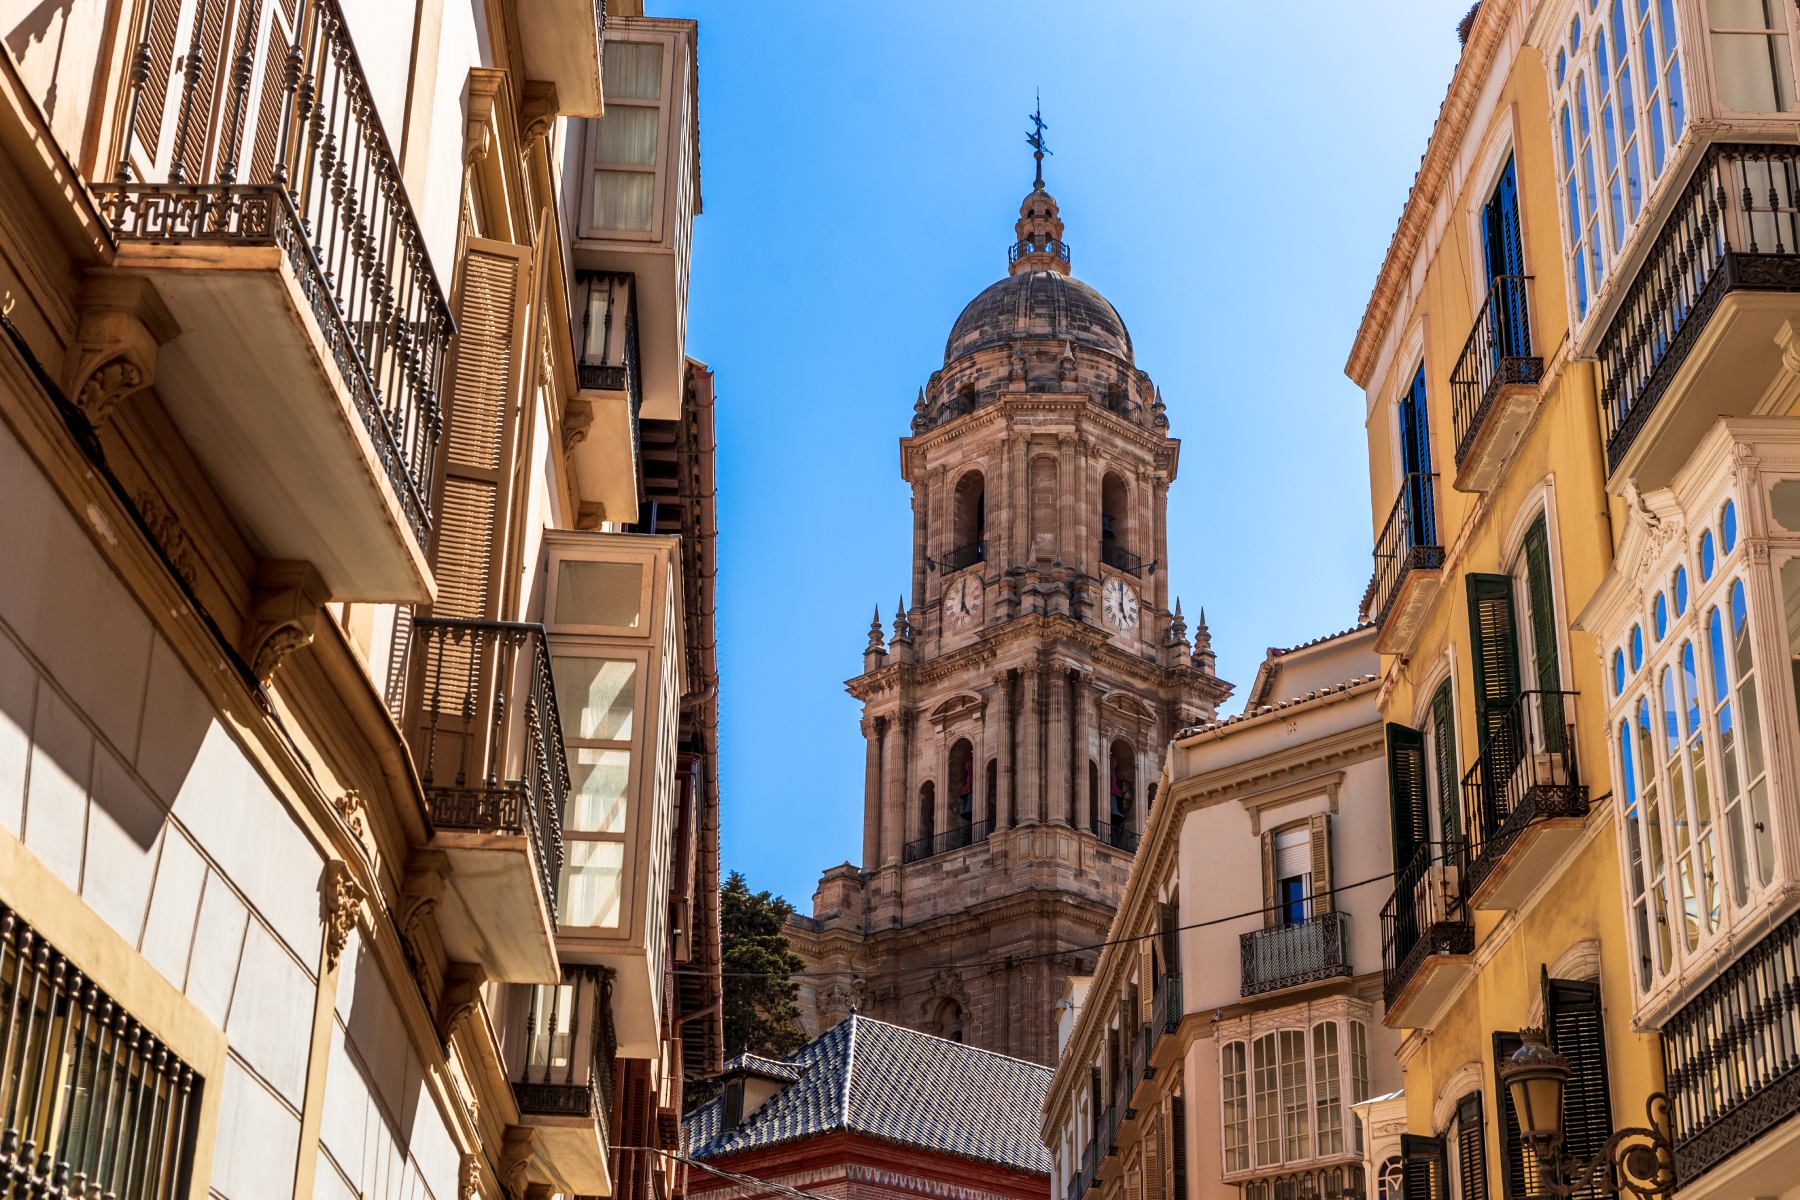 Malaga Cathedral tower seen between buildings lining a narrow street on a sunny day in Malaga, Spain